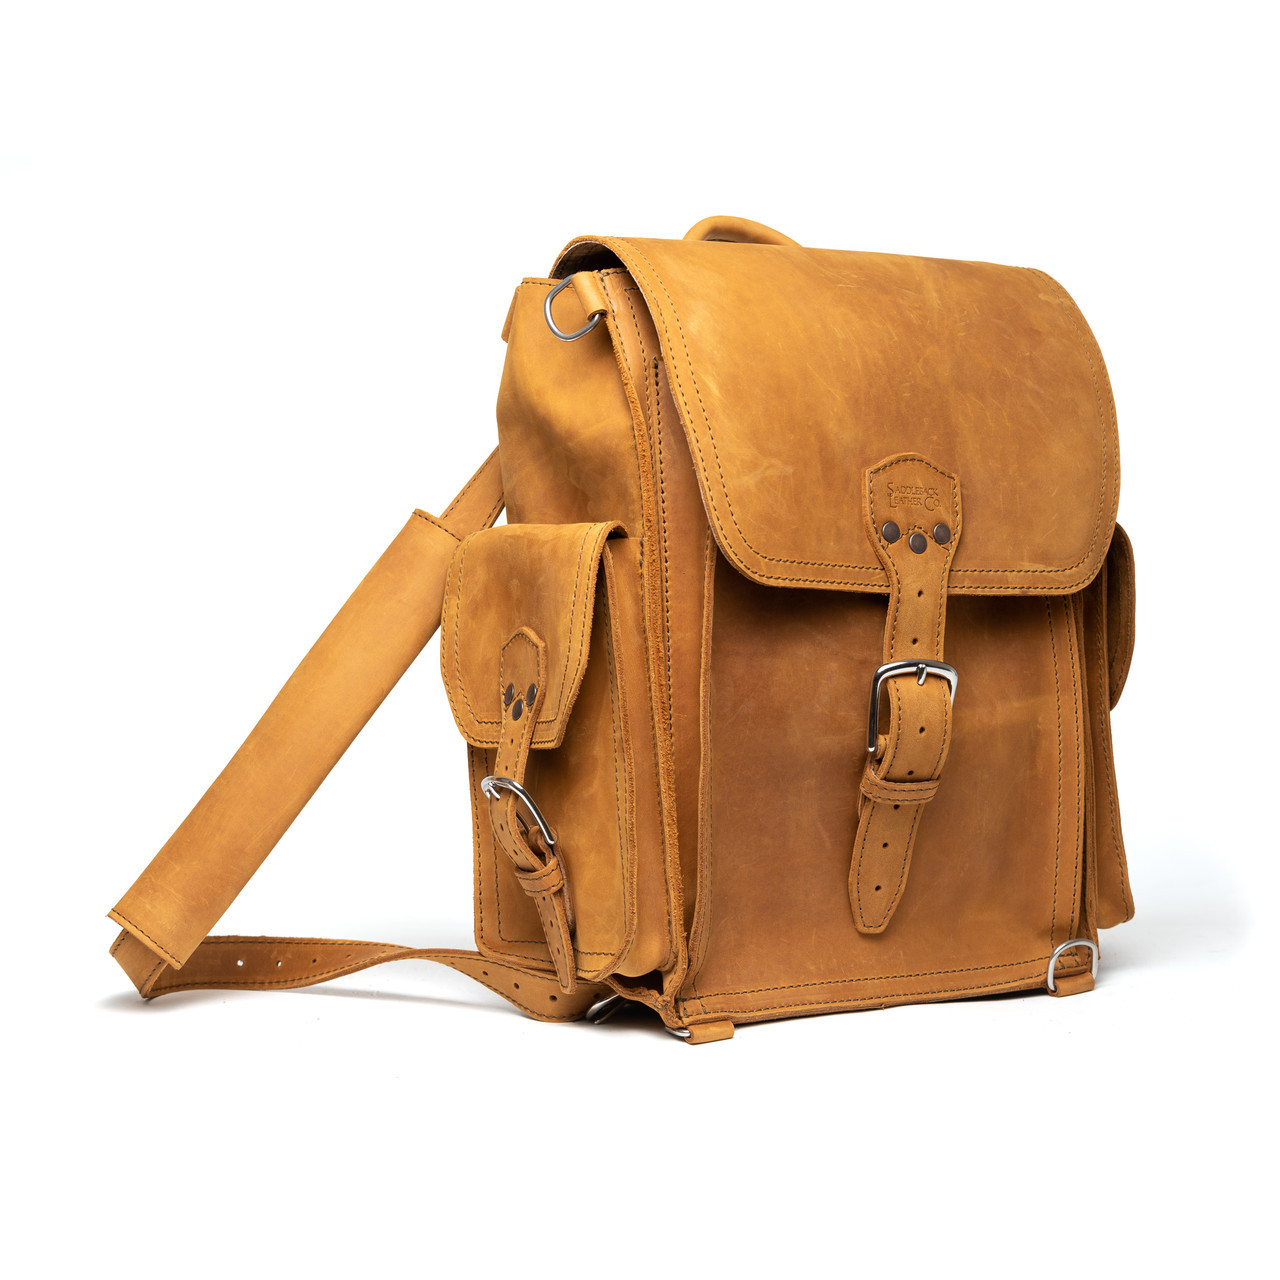 Back in stock, just in time for school! Shop the Daeniel Backpack